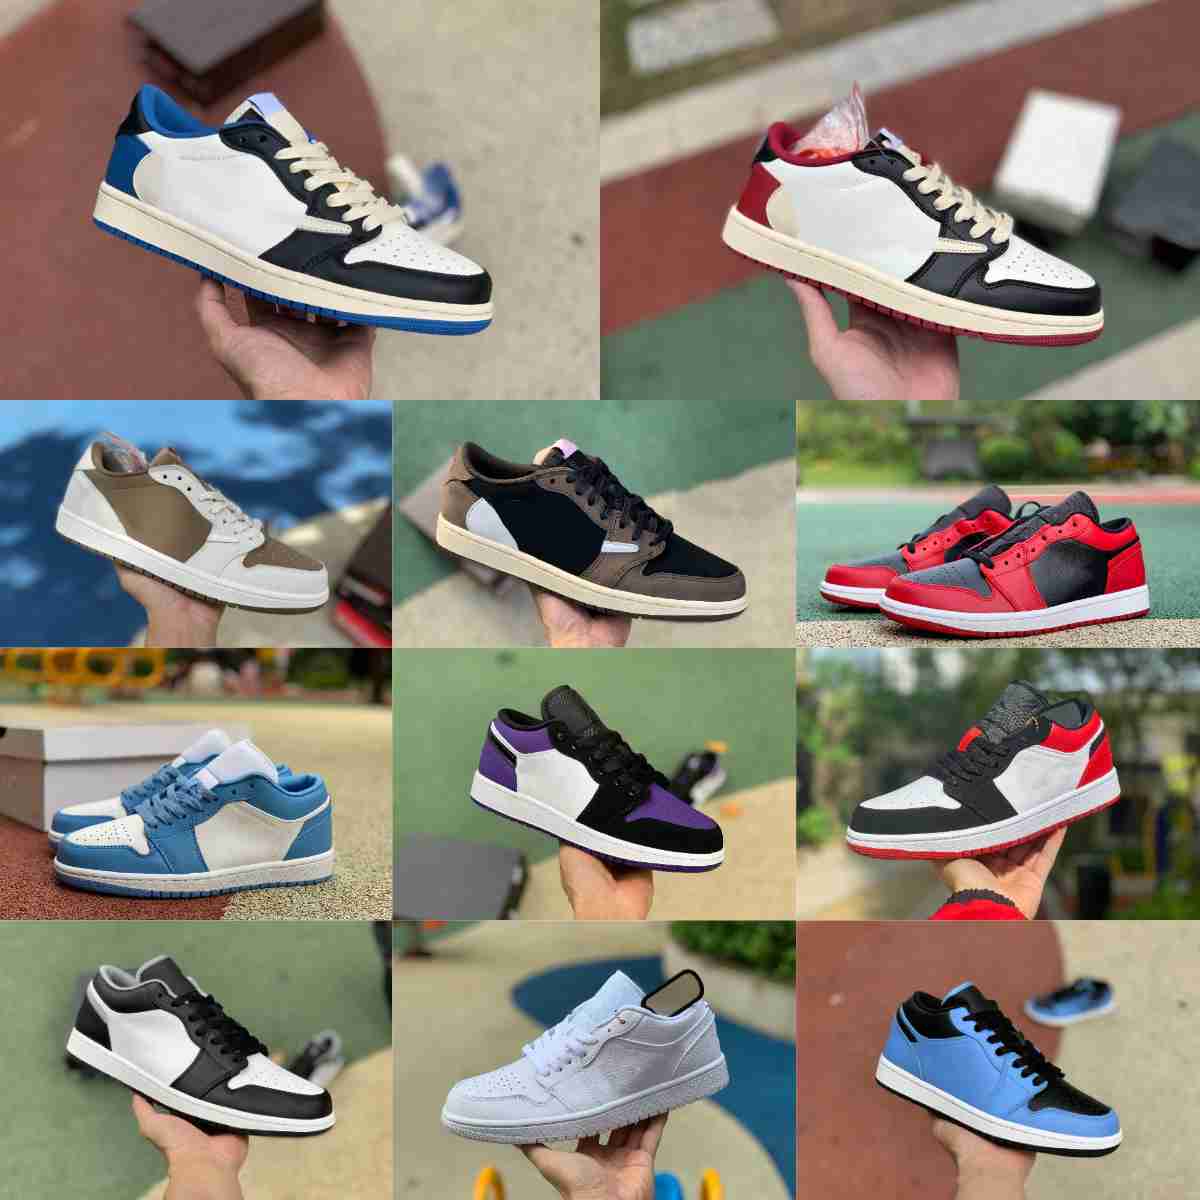 Fragment TS Jumpman 1 1S Low Basketball Shoes Trainer Court Purple Black Shadow Panda Emerald Crimson Tint White Brown Red Gold Grey Toe UNC Designer Sports Sneakers